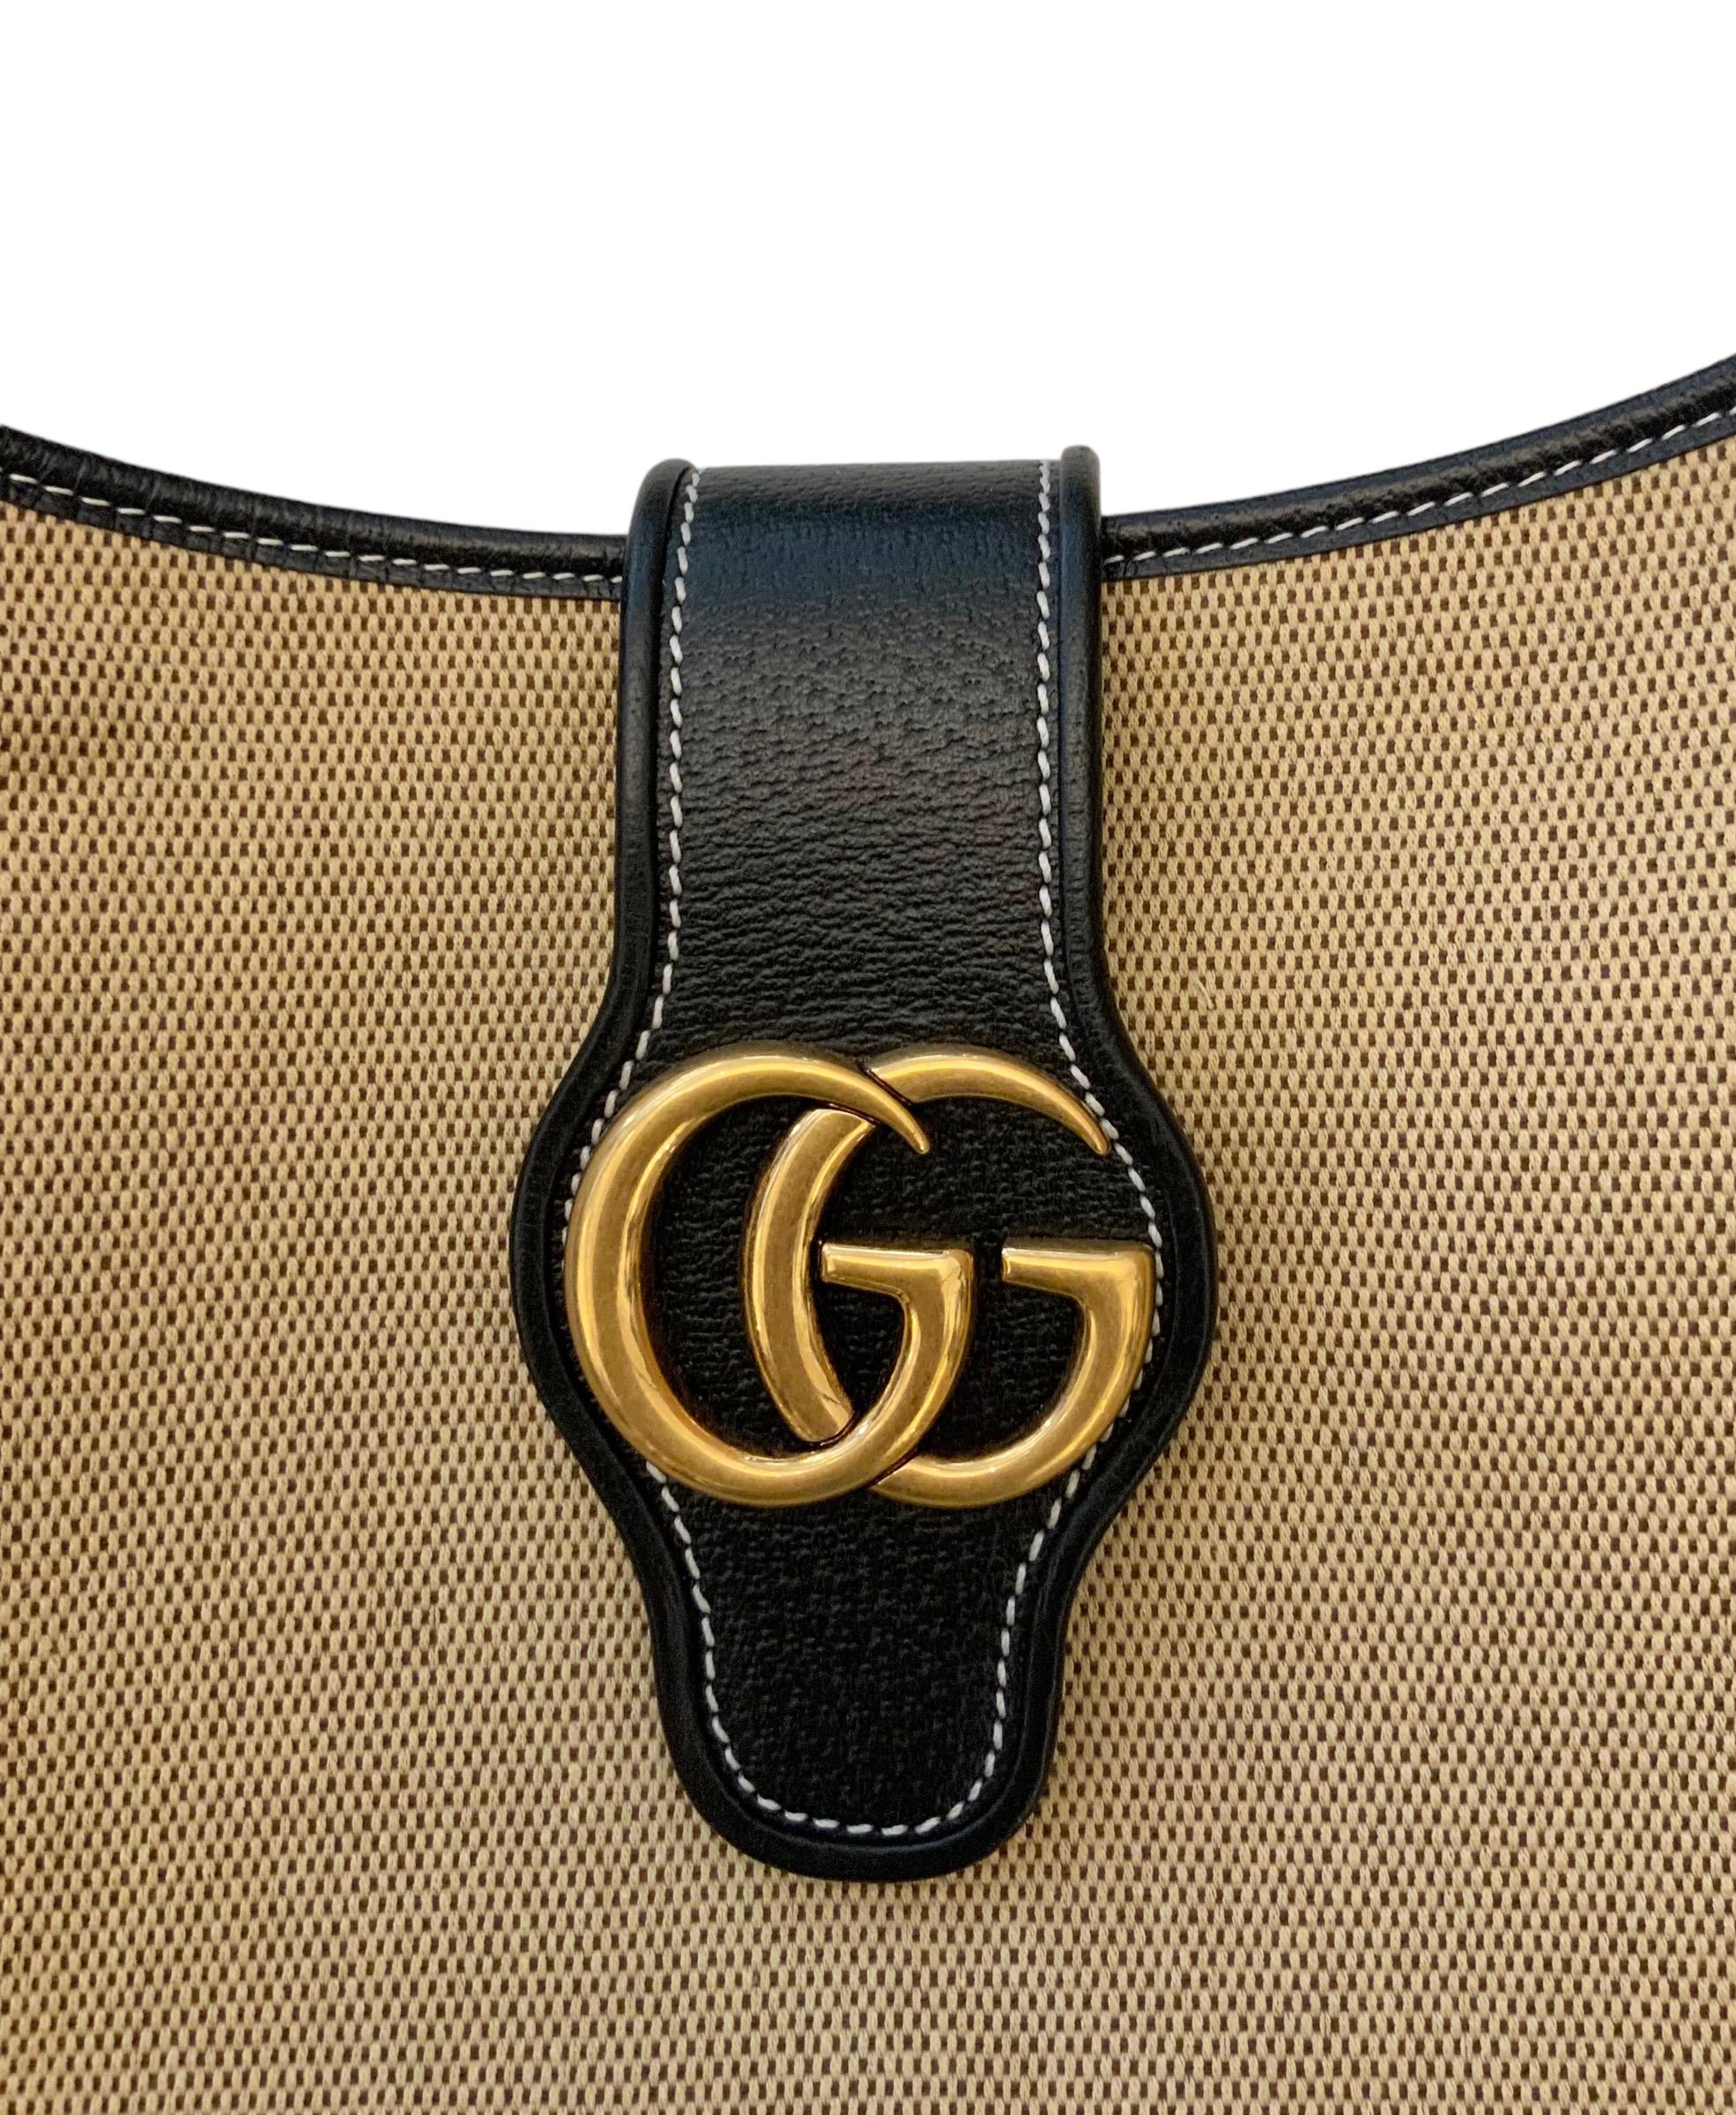 Made from canvas and trimmed with smooth calf leather, this large iteration of the Aphrodite bag is part of Gucci's Cosmogonie collection.
It features a signature Double G plaque in the front, originally introduced in the 1970s.
The top folds over